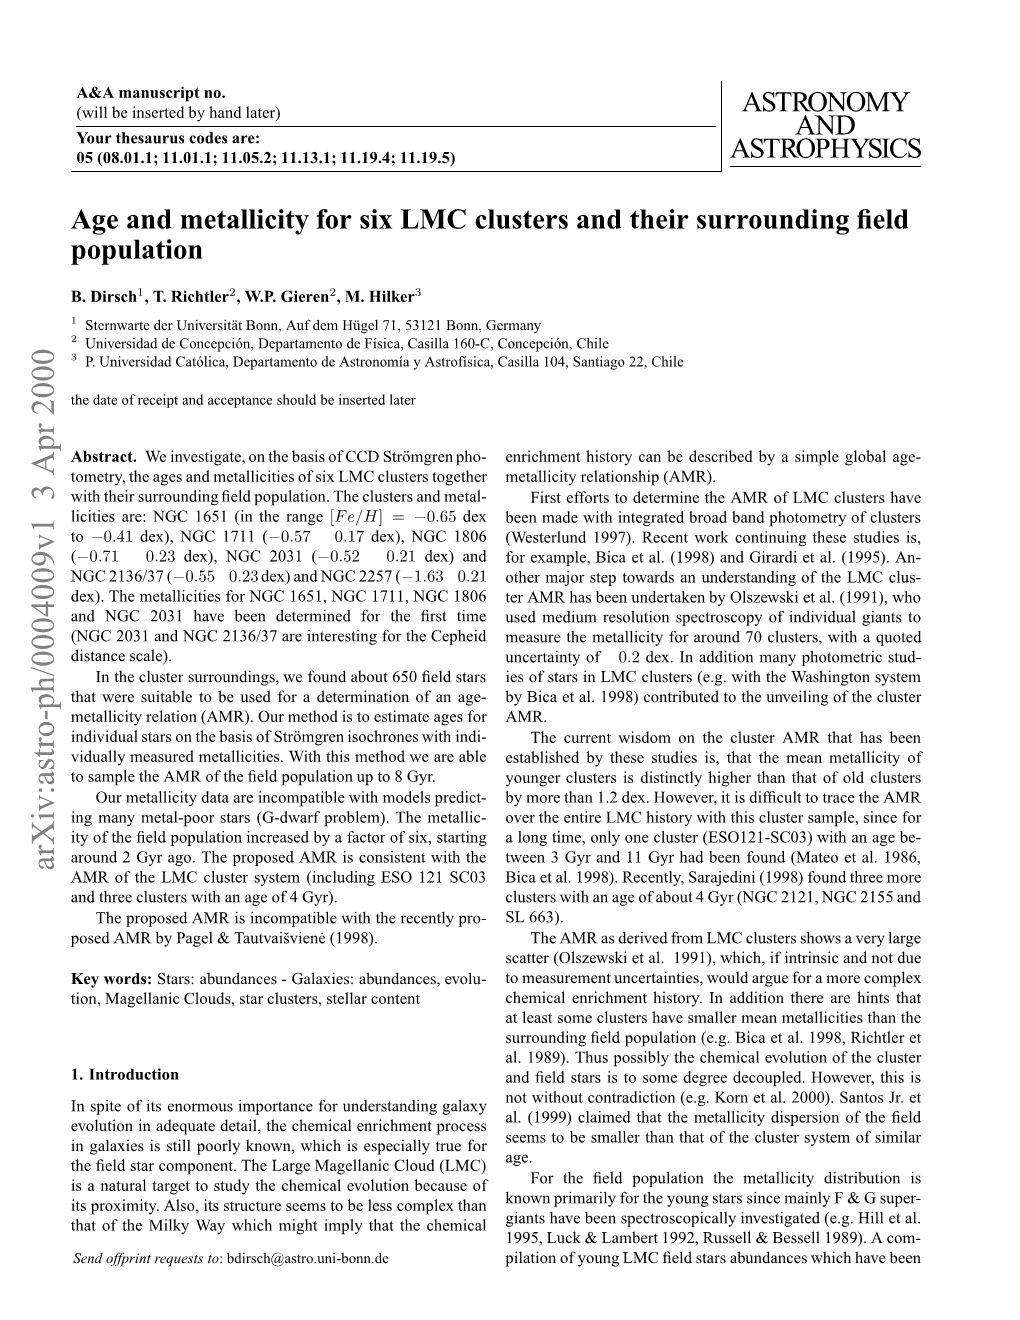 Age and Metallicity for Six LMC Clusters and Their Surrounding Field